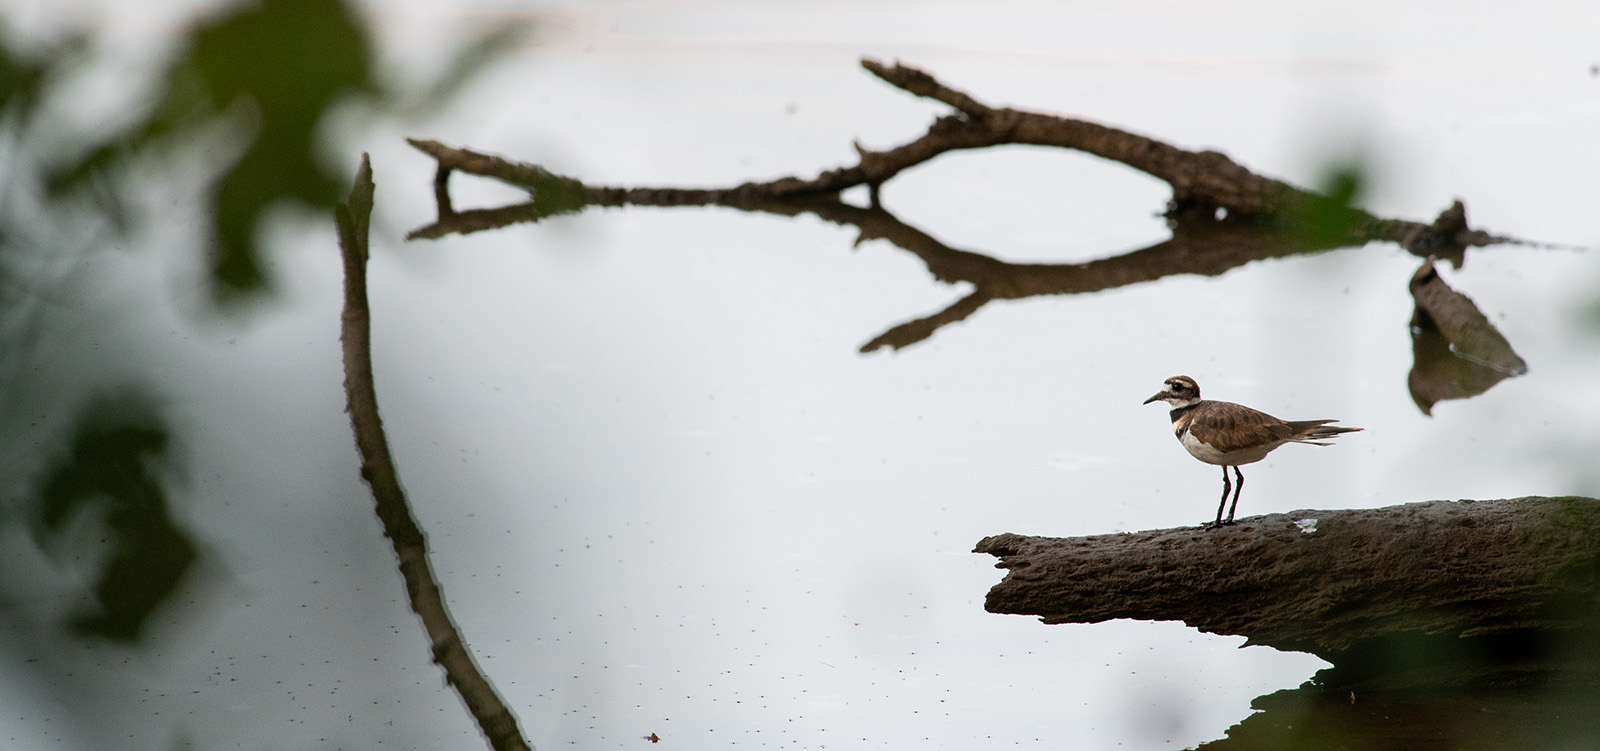 A small killdeer bird perched on a log that's sticking out into the water.